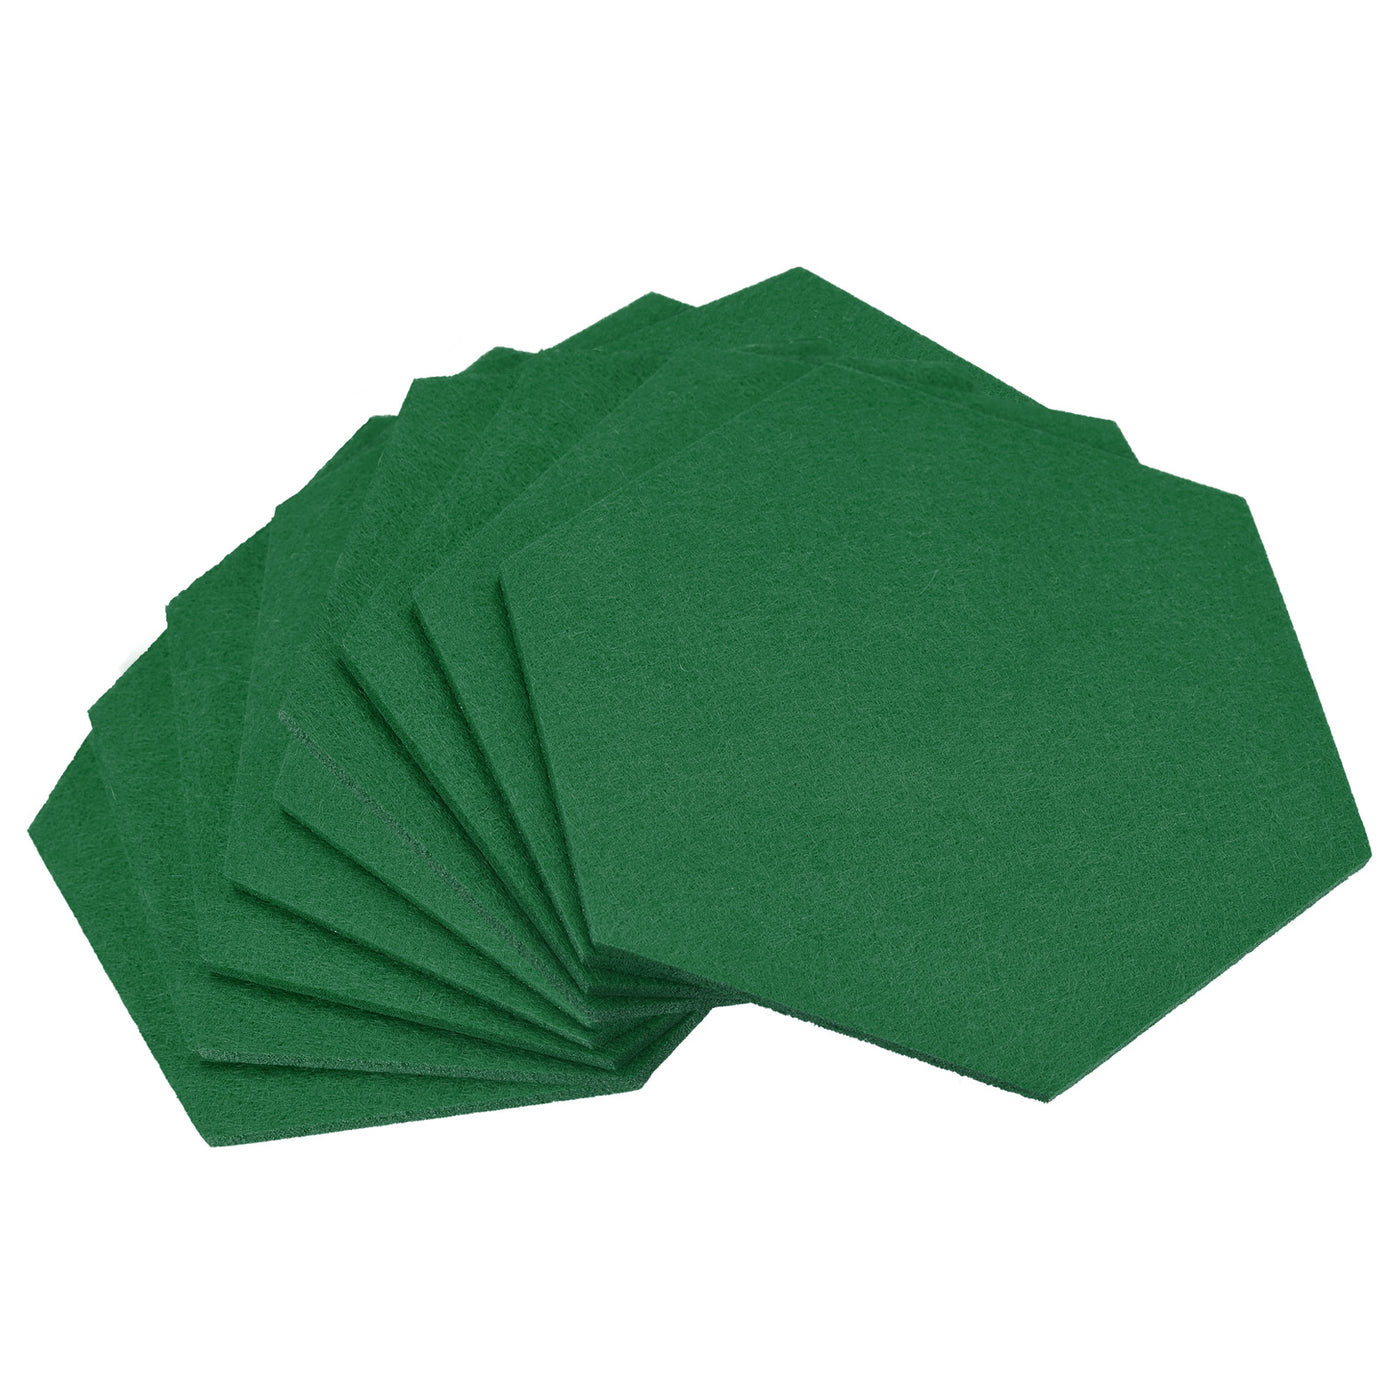 uxcell Uxcell Felt Coasters 9pcs Absorbent Pad Coaster for Drink Cup Pot Bowl Vase Green